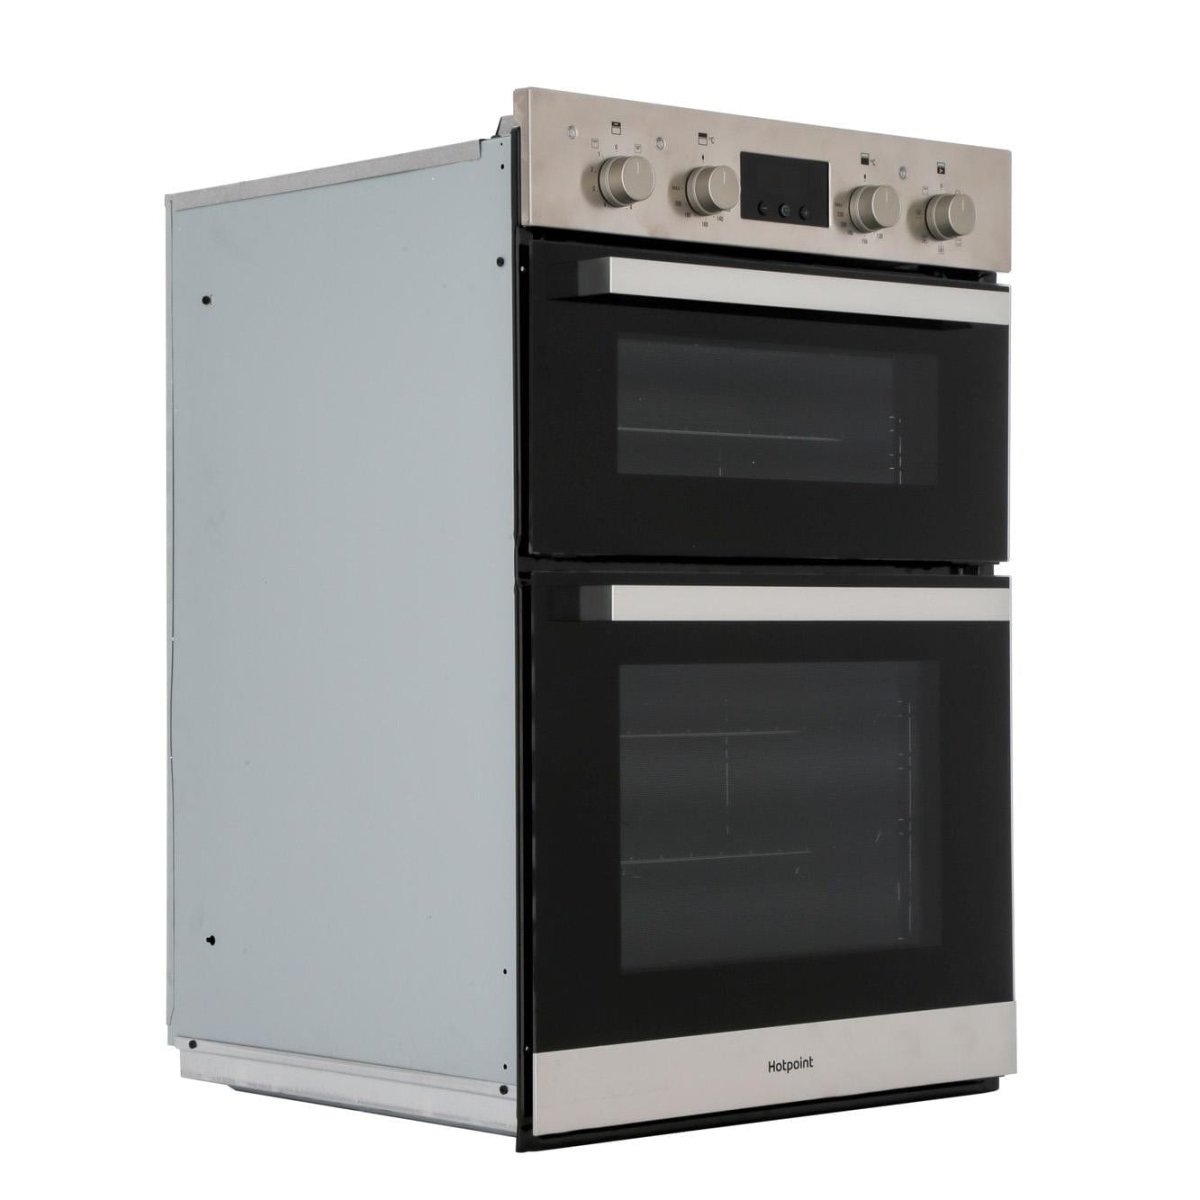 Hotpoint DKD3841IX Multifunction Electric Built In Double Oven - Stainless Steel | Atlantic Electrics